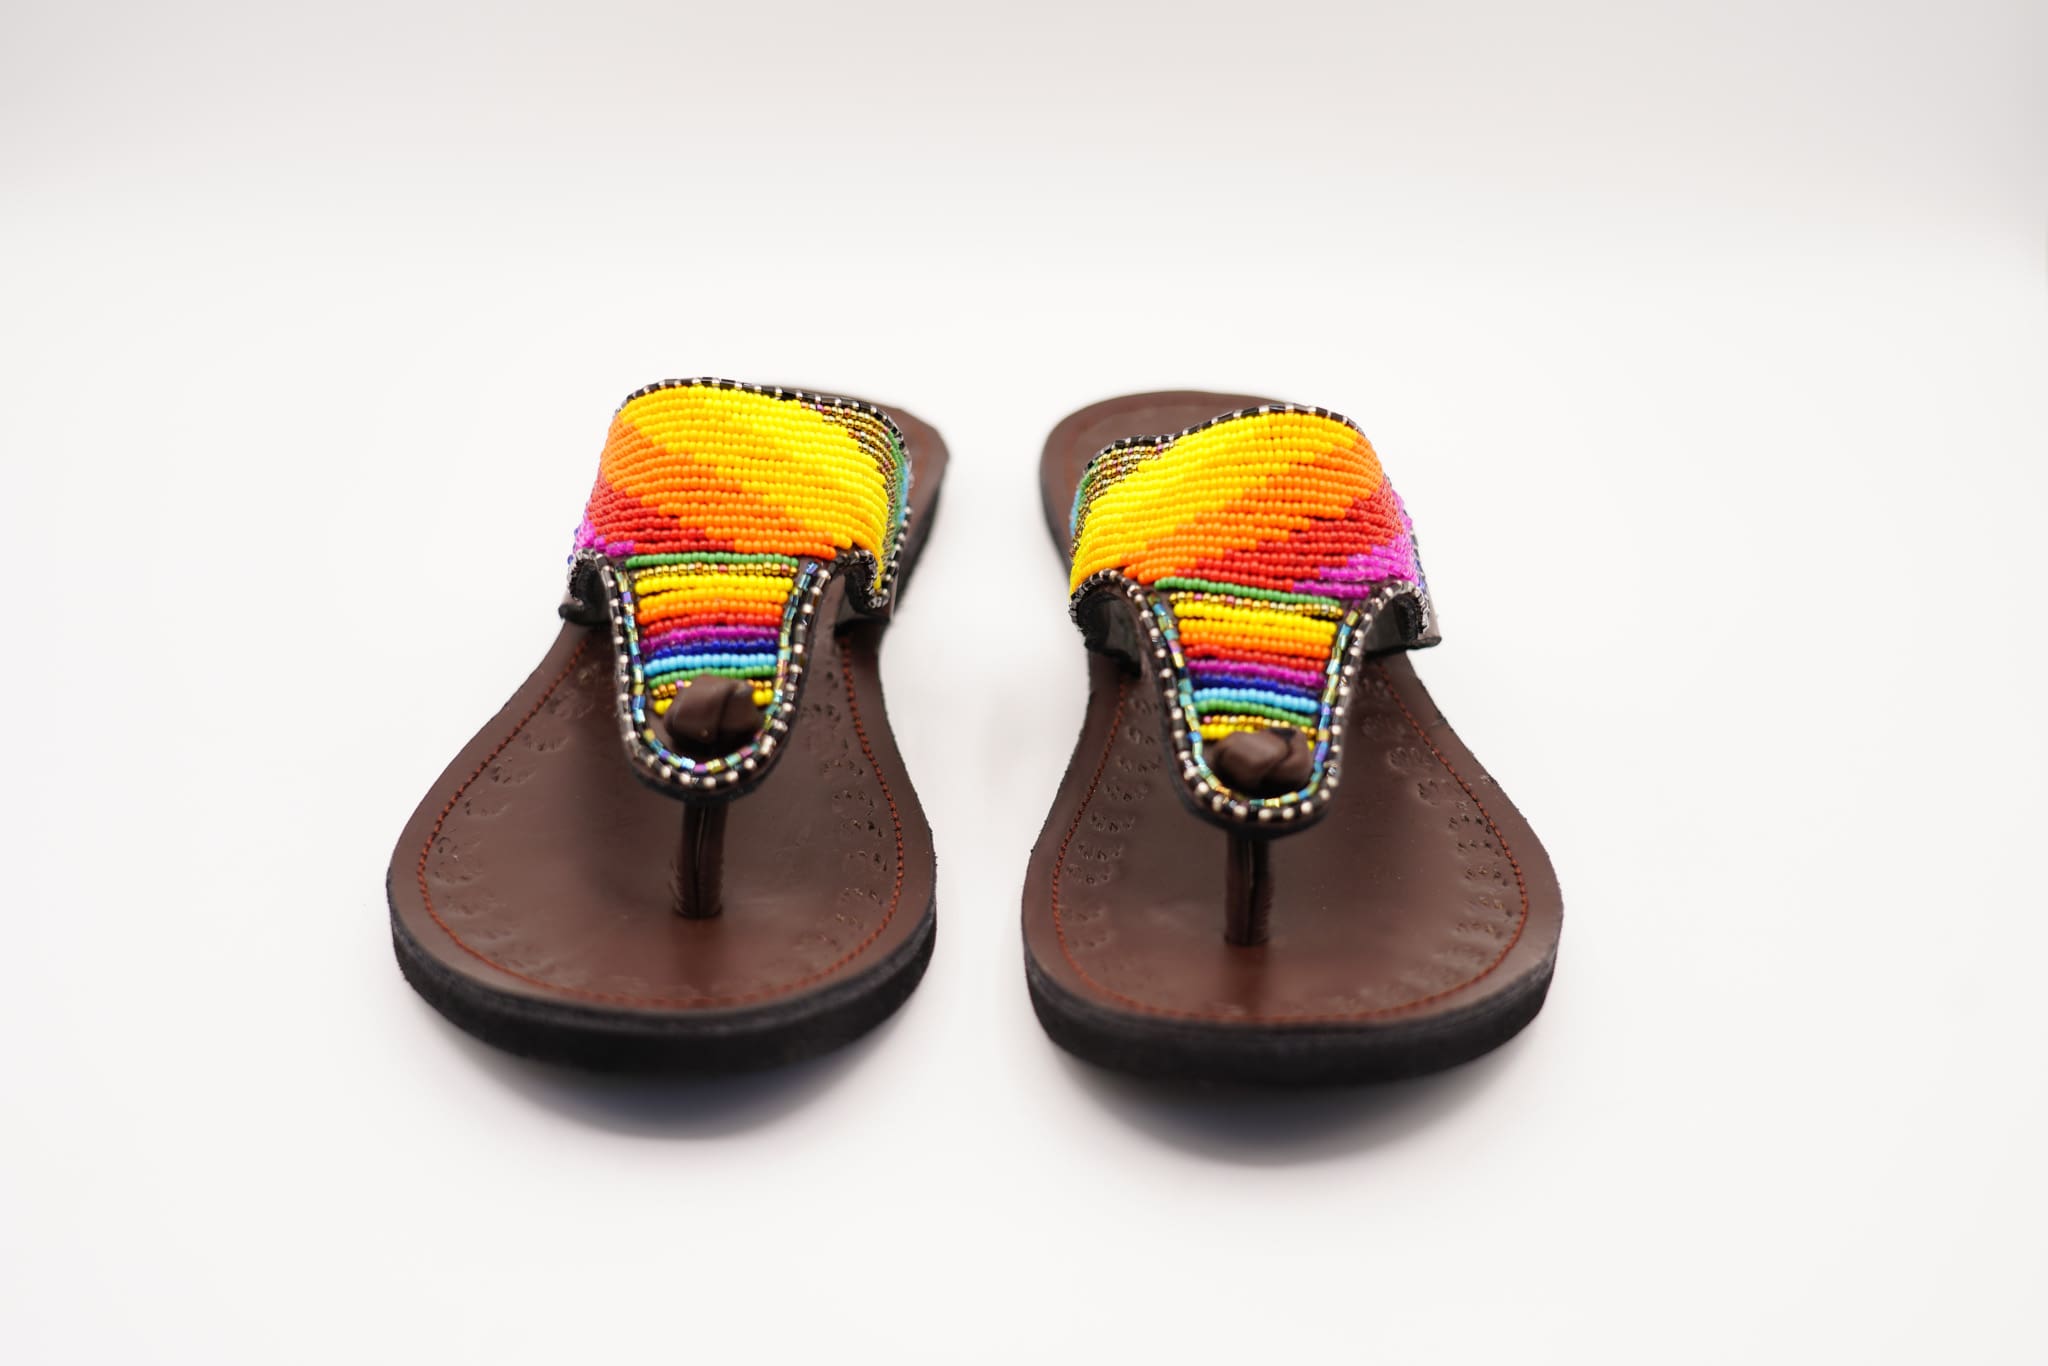 The Fade Leather Sandal for women